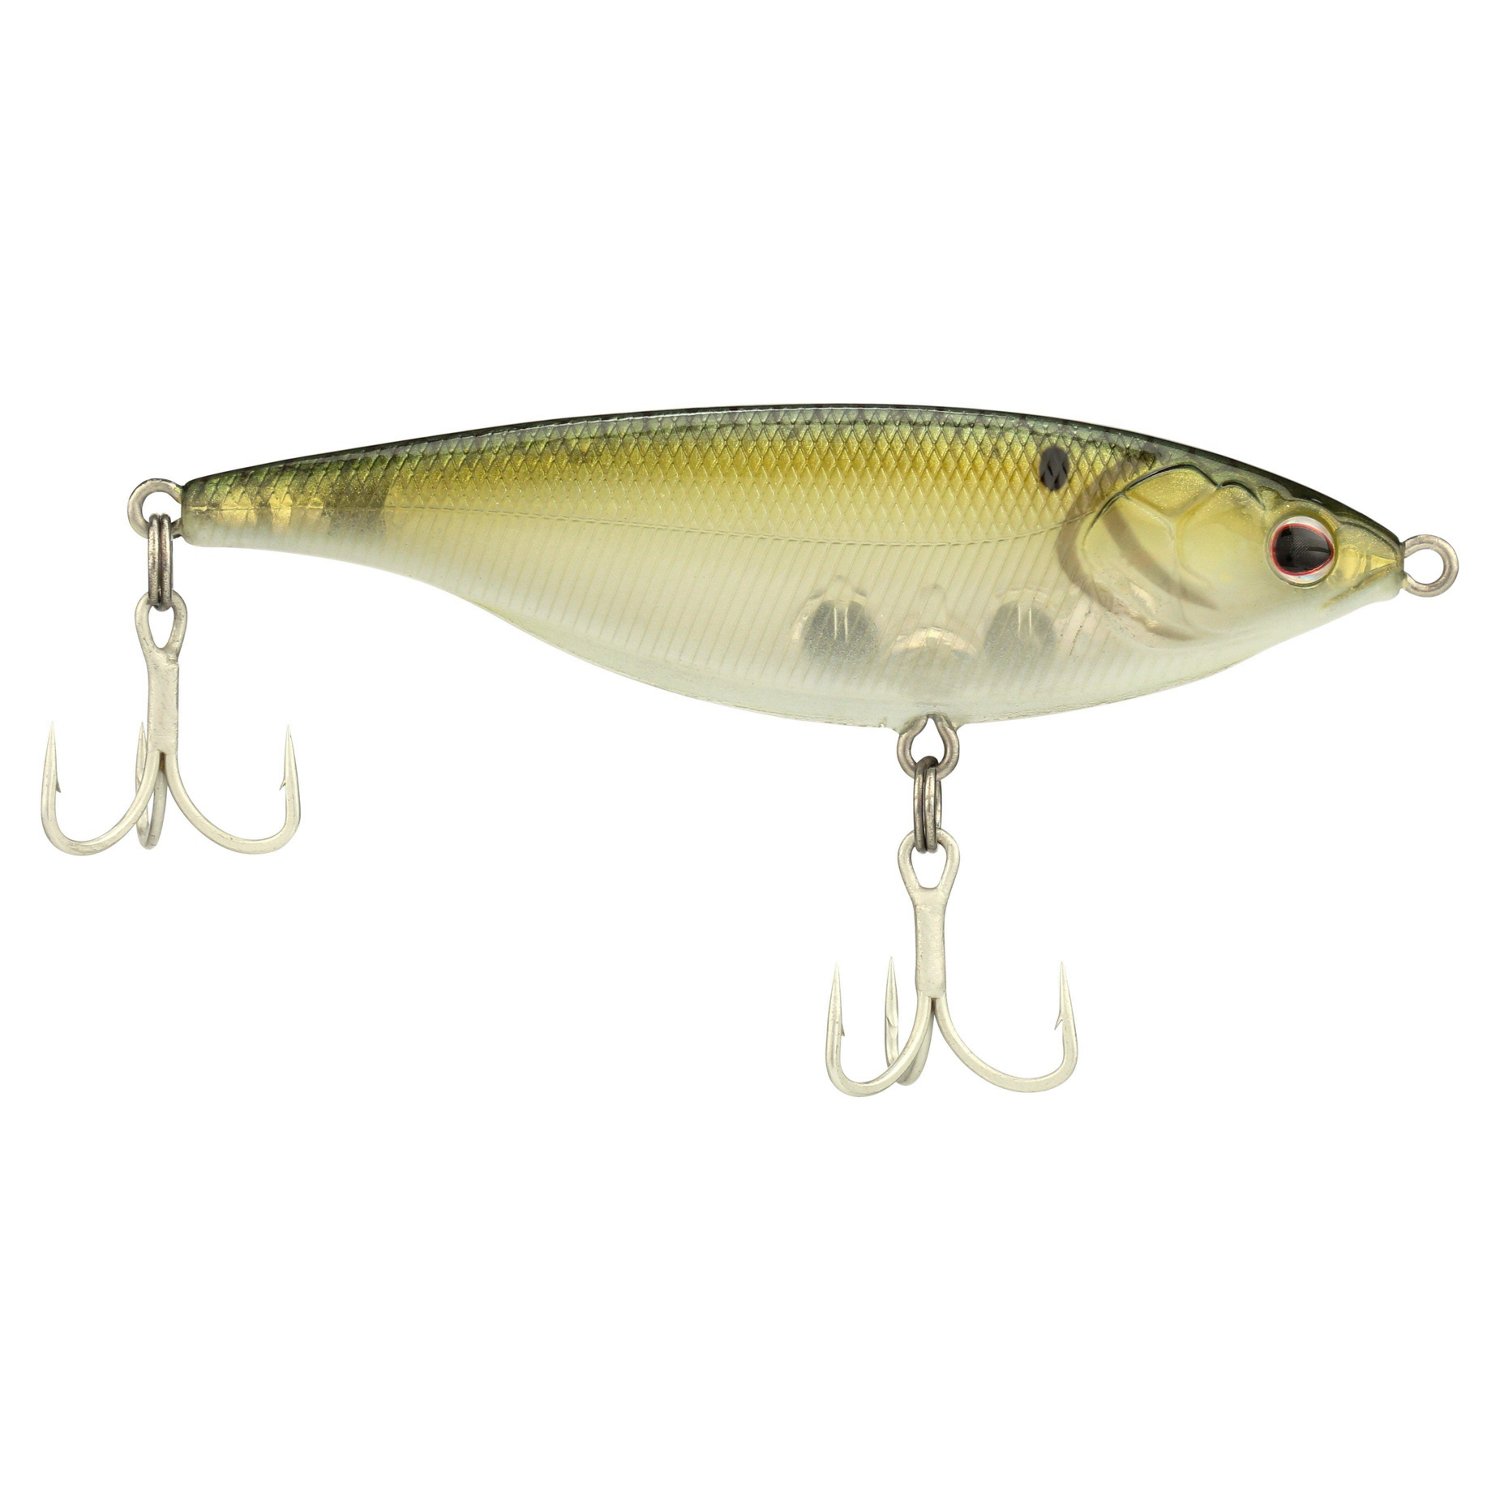 https://academy.scene7.com/is/image/academy//baits---lures/berkley-45-in-stick-shadd-saltwater-114-shallow-stick-bait-bhbss114su-pil-pilchard/ec761cd9095c44008415df86a9b82027?$pdp-gallery-ng$